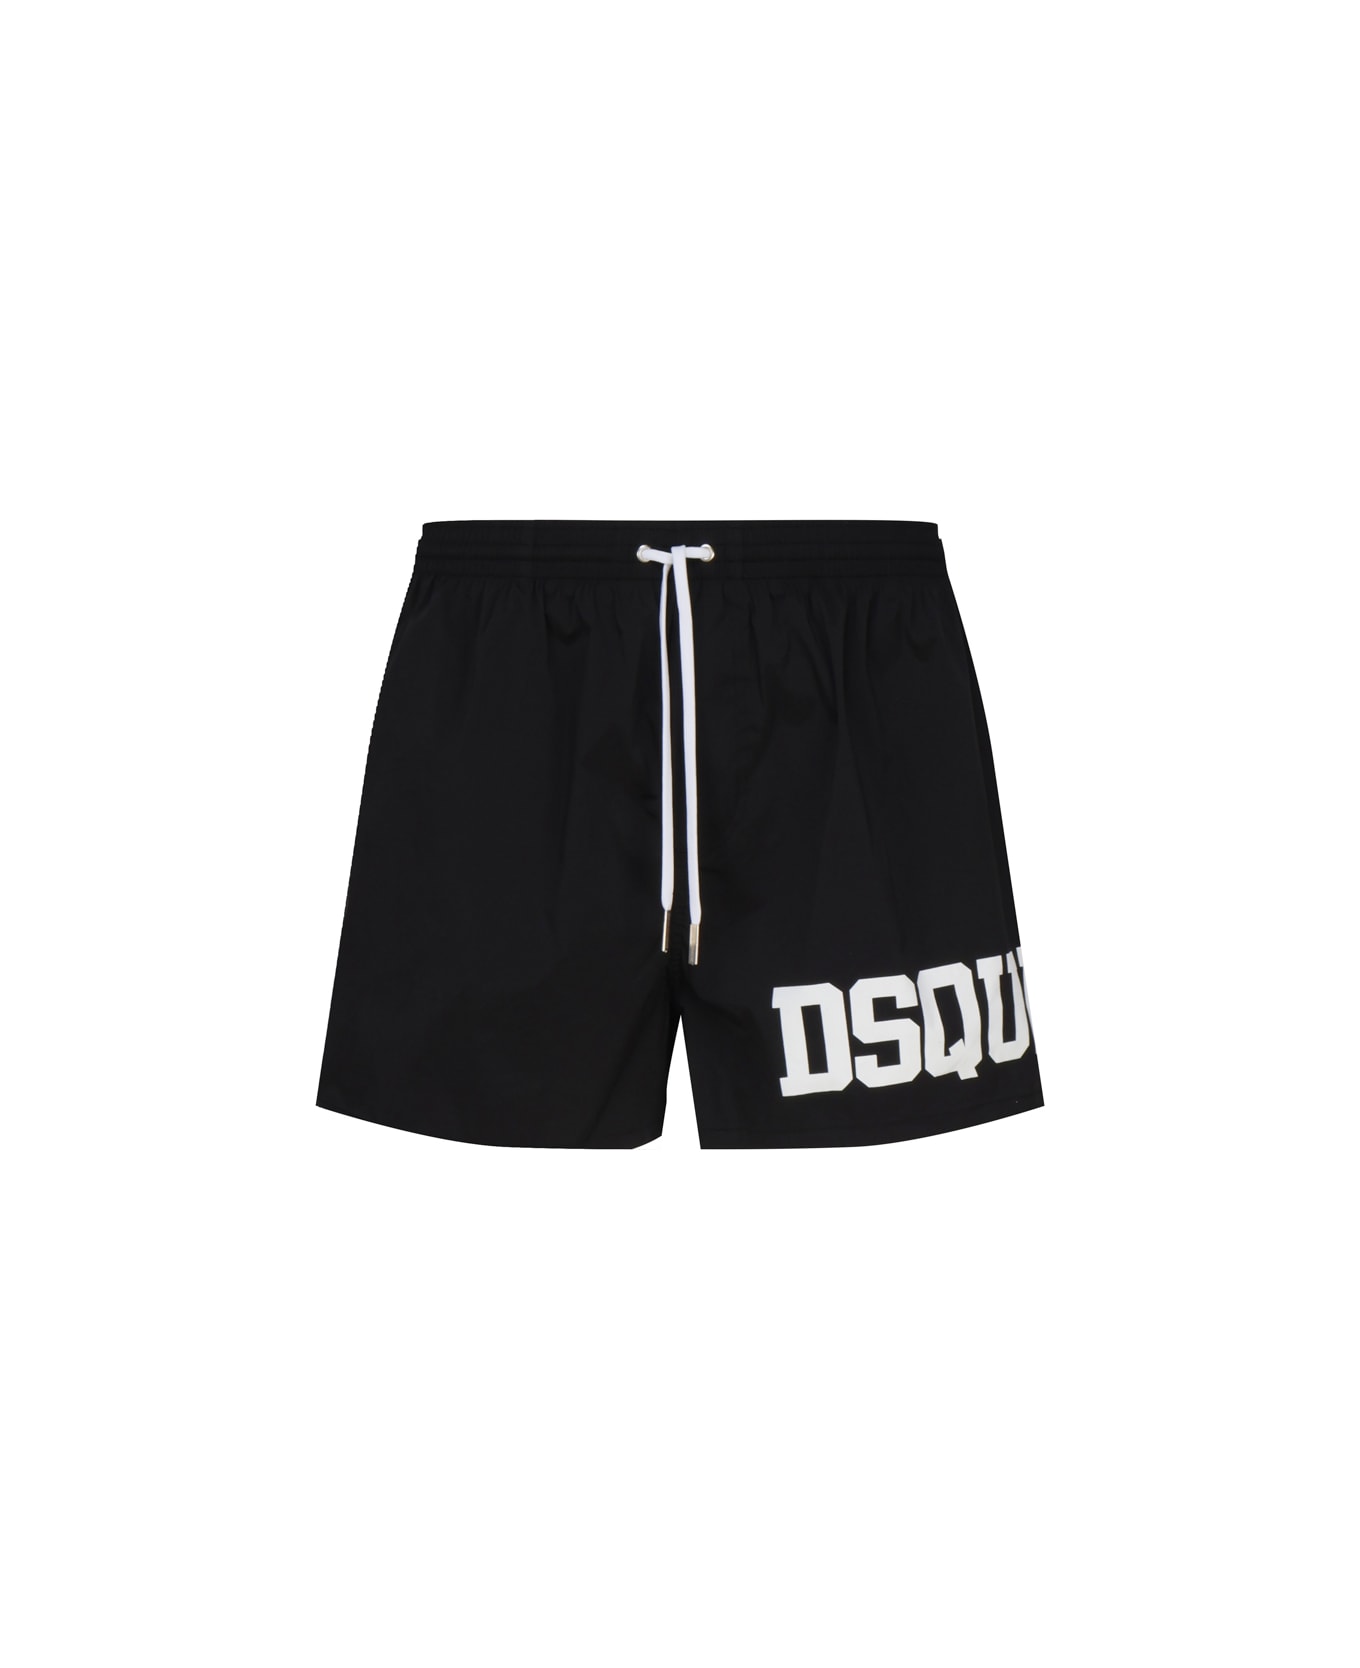 Dsquared2 Logo Swimsuit In Contrasting Color - Black/white